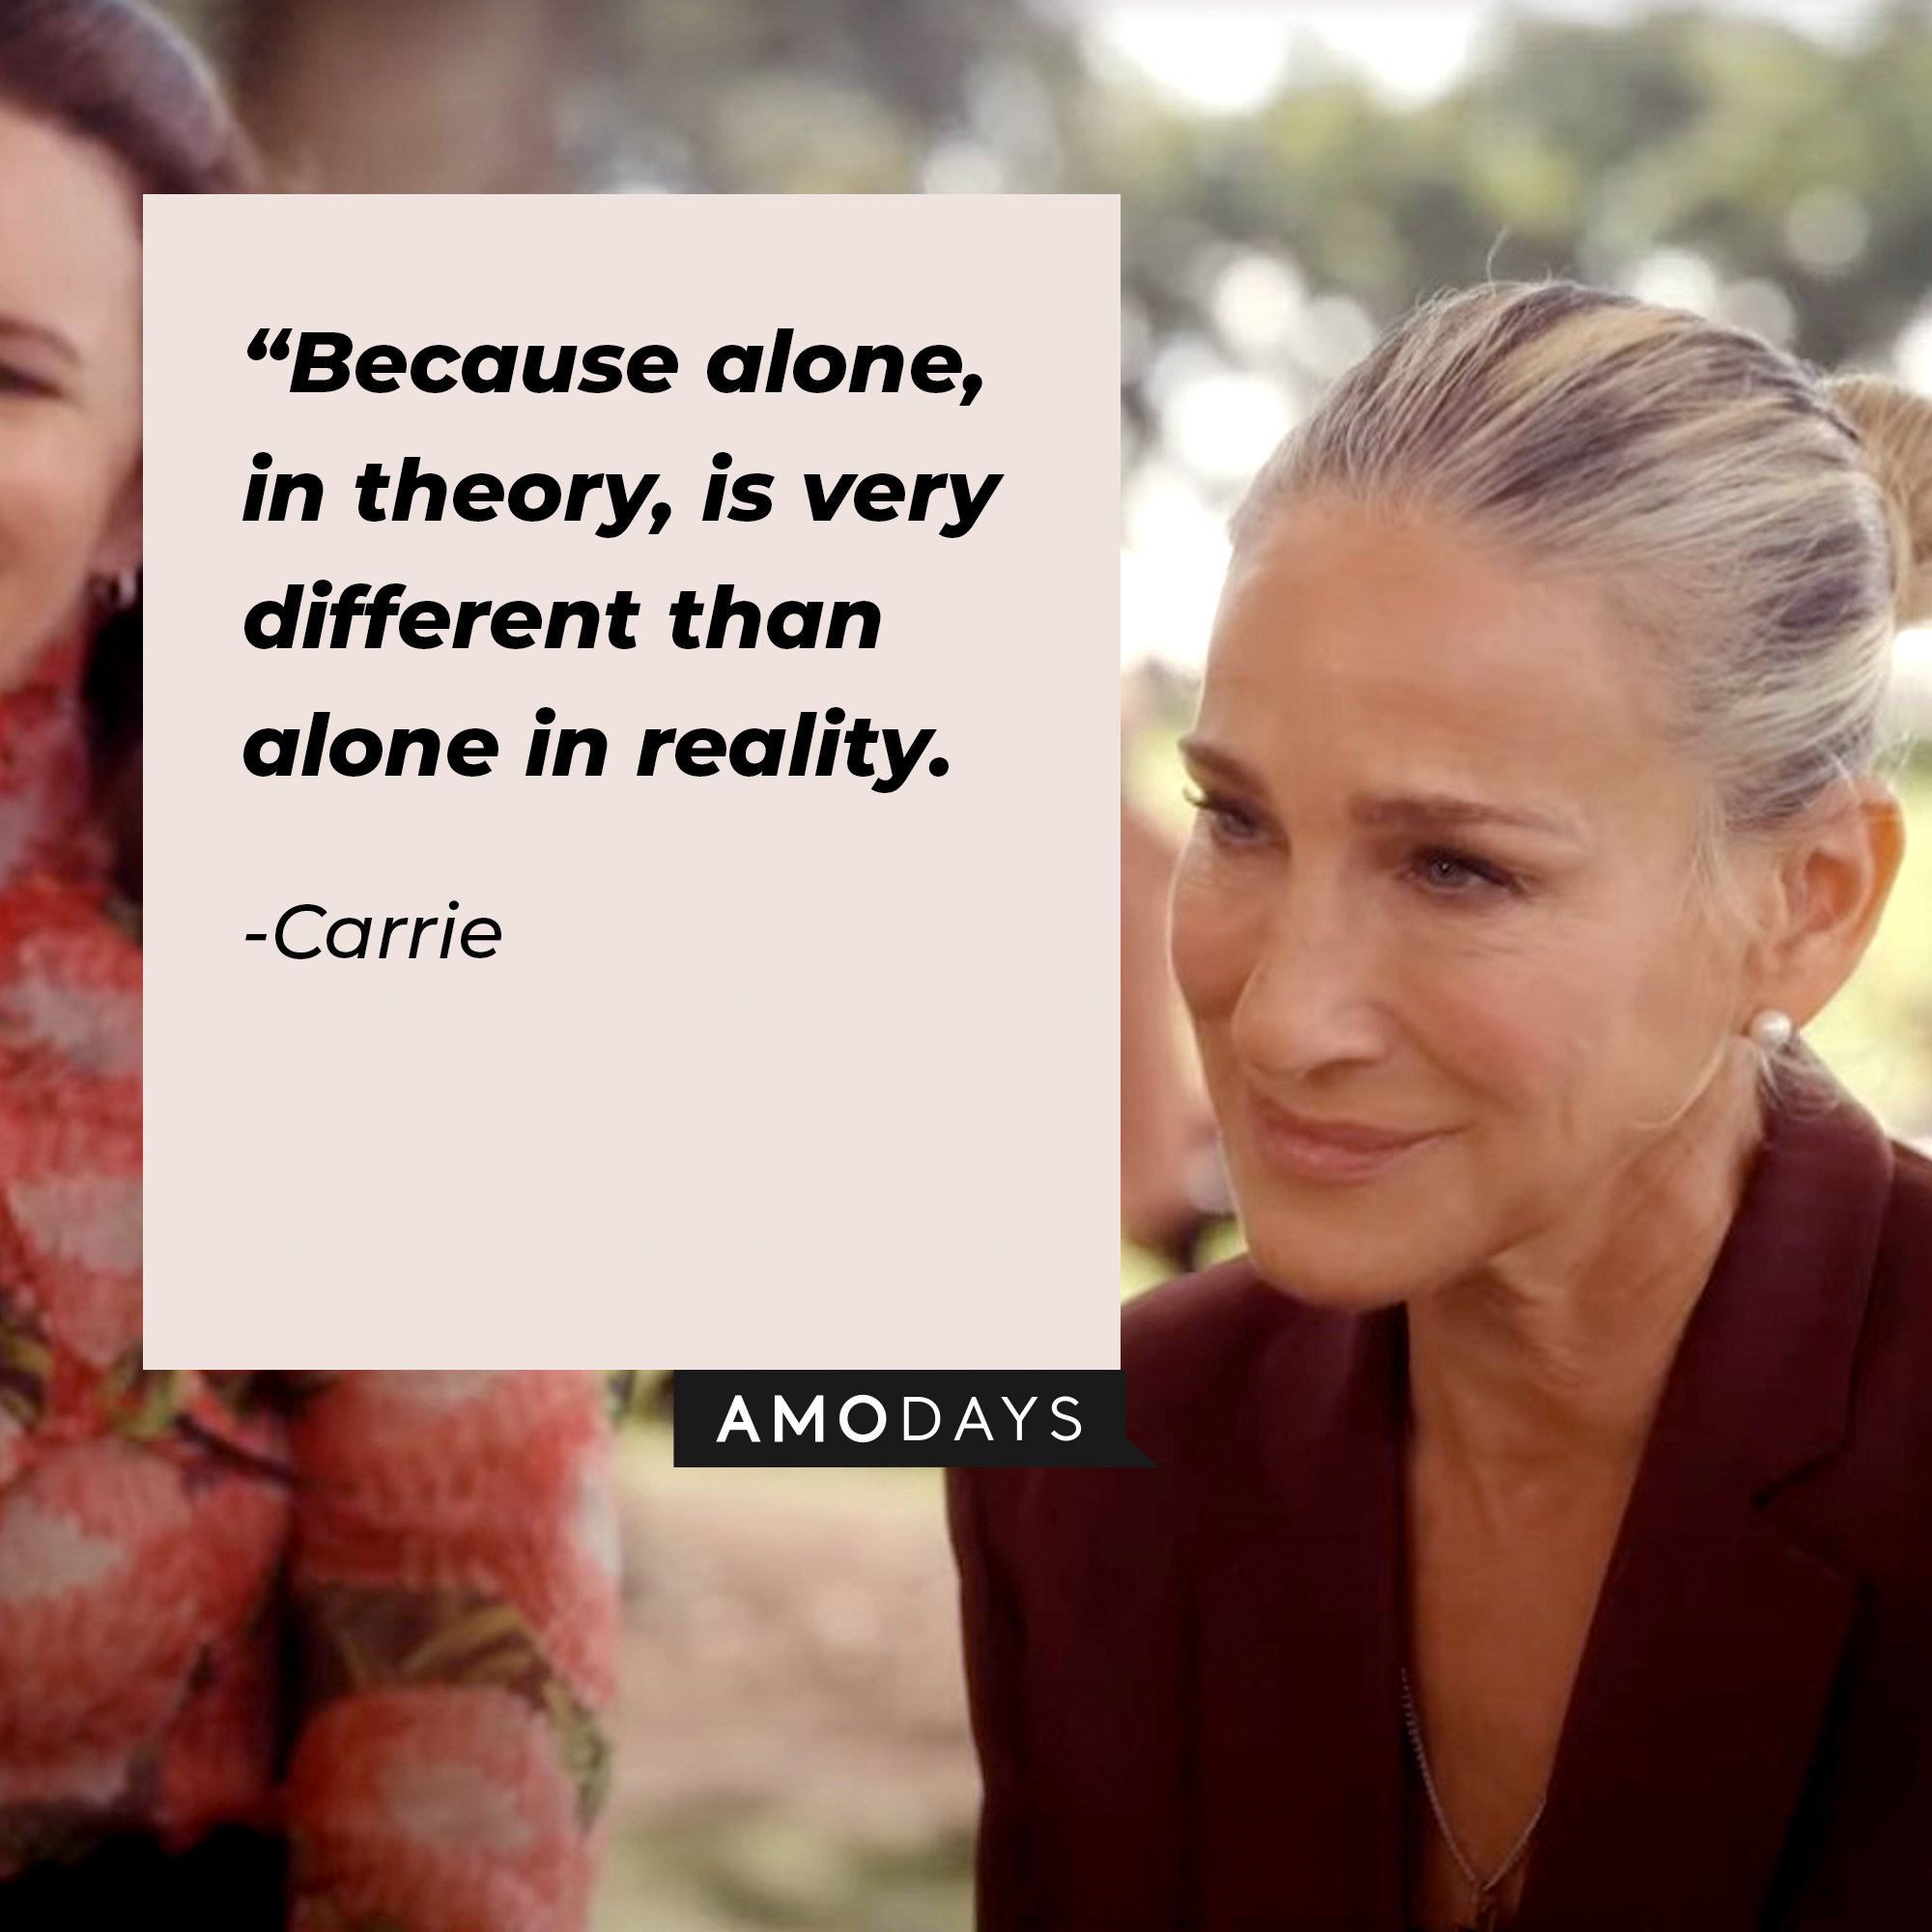 An image of Carrie with her quote: “Because alone, in theory, is very different than alone in reality.” | facebook.com/justlikethatmax